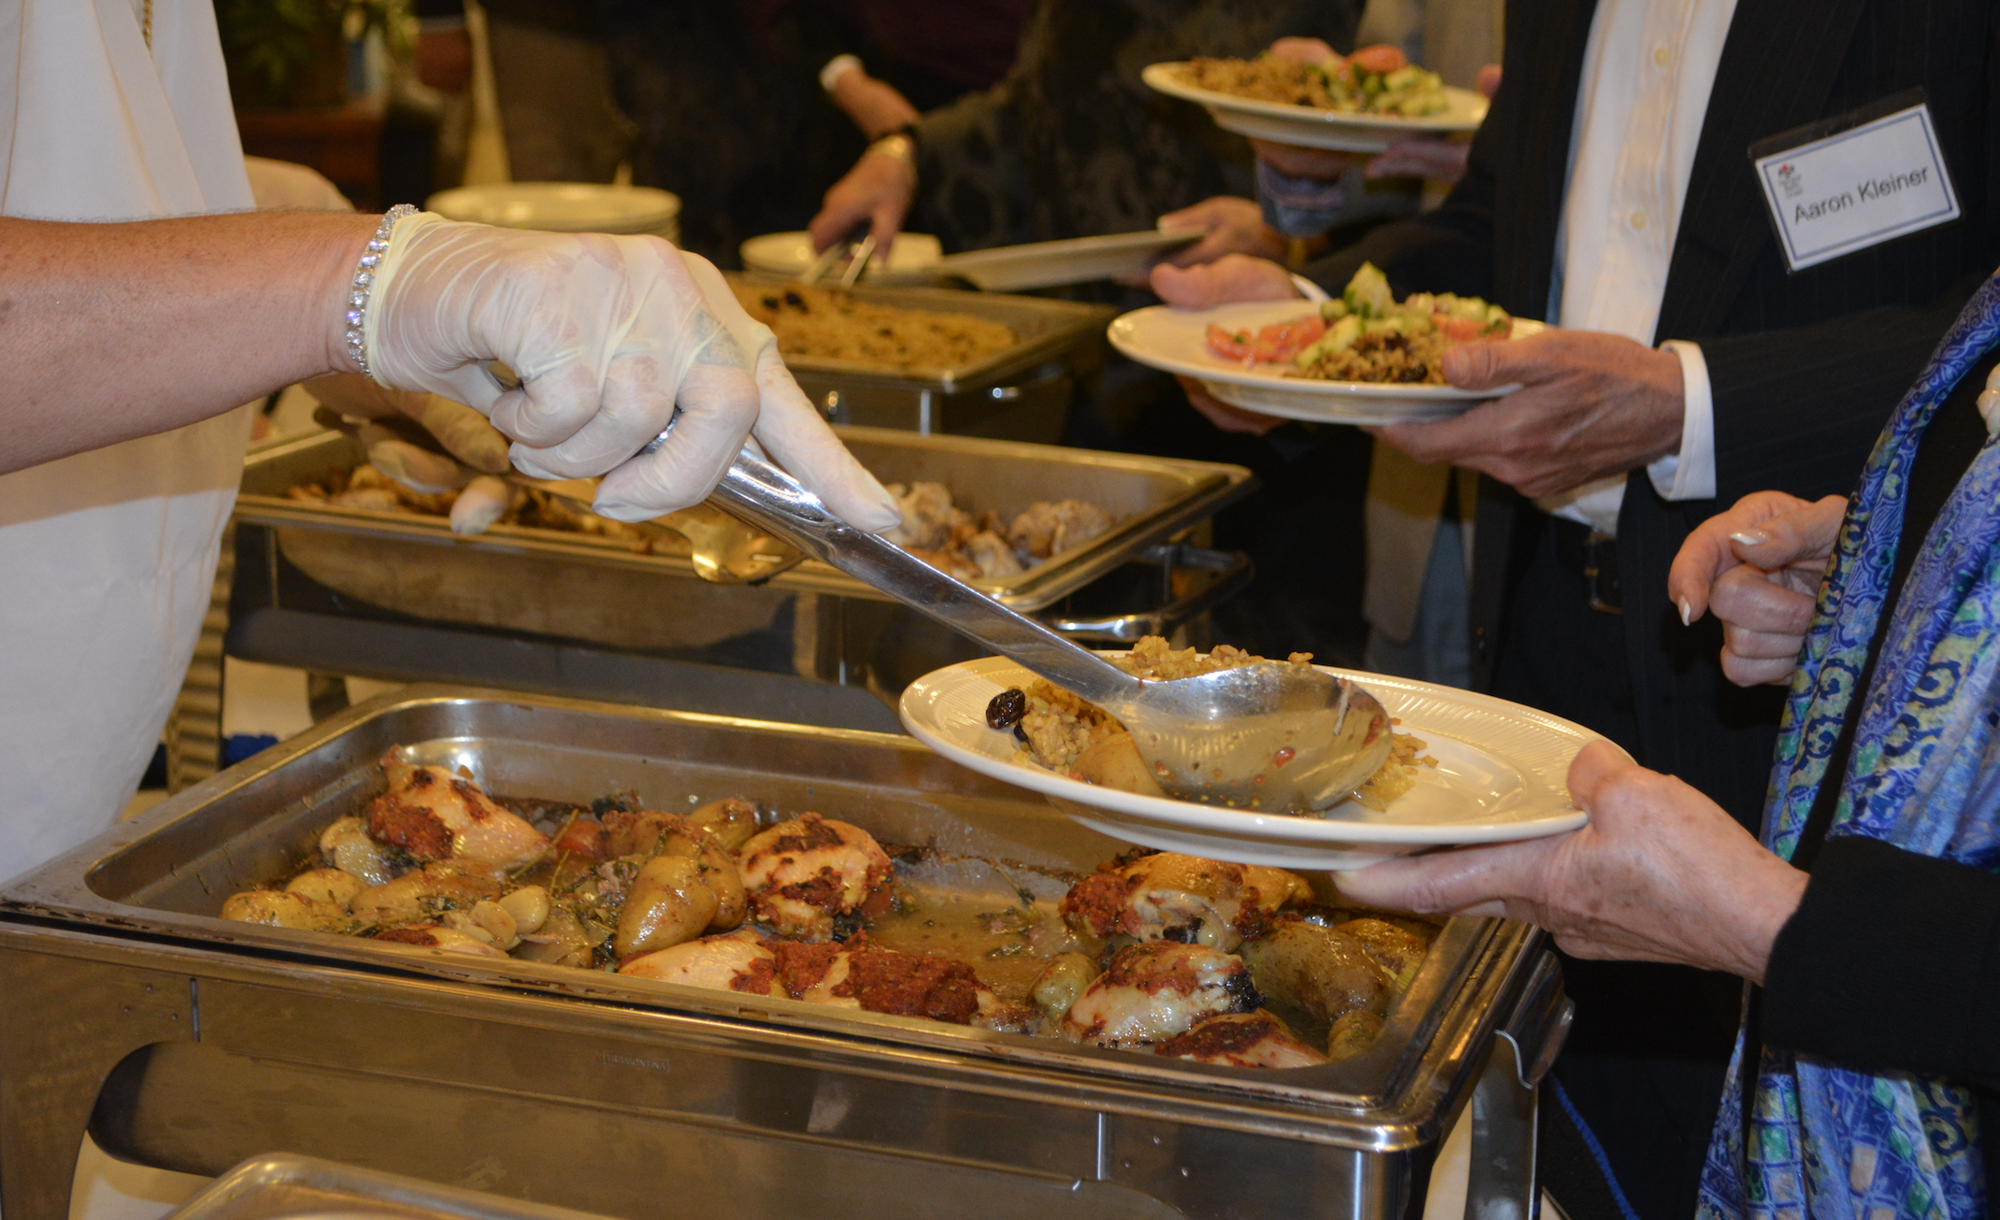 Chicken thighs and potatoes are served at shabbat dinner Friday night during the inaugural Israel Weekend at Temple Beth Israel.